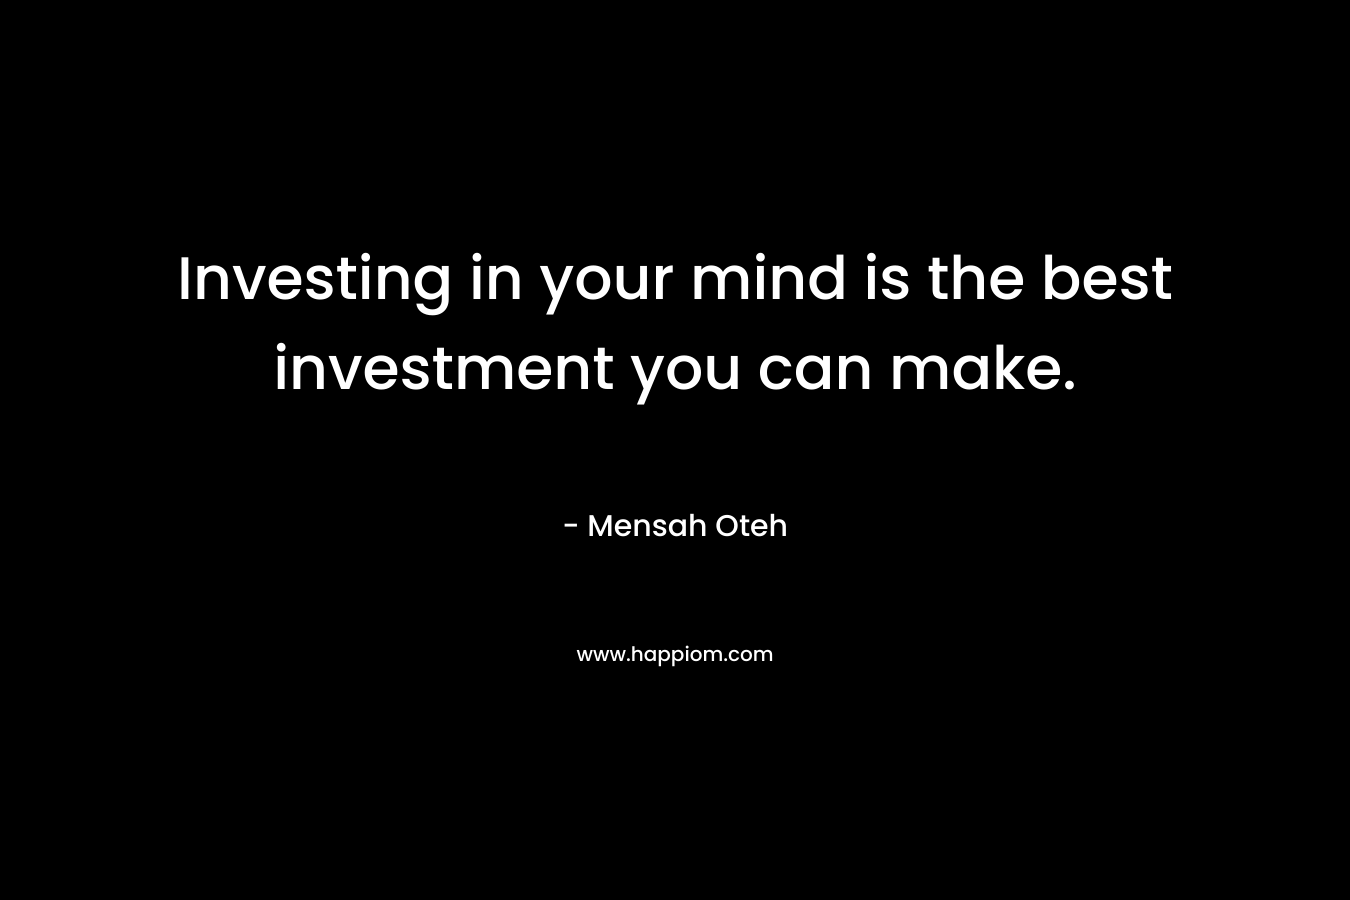 Investing in your mind is the best investment you can make. – Mensah Oteh